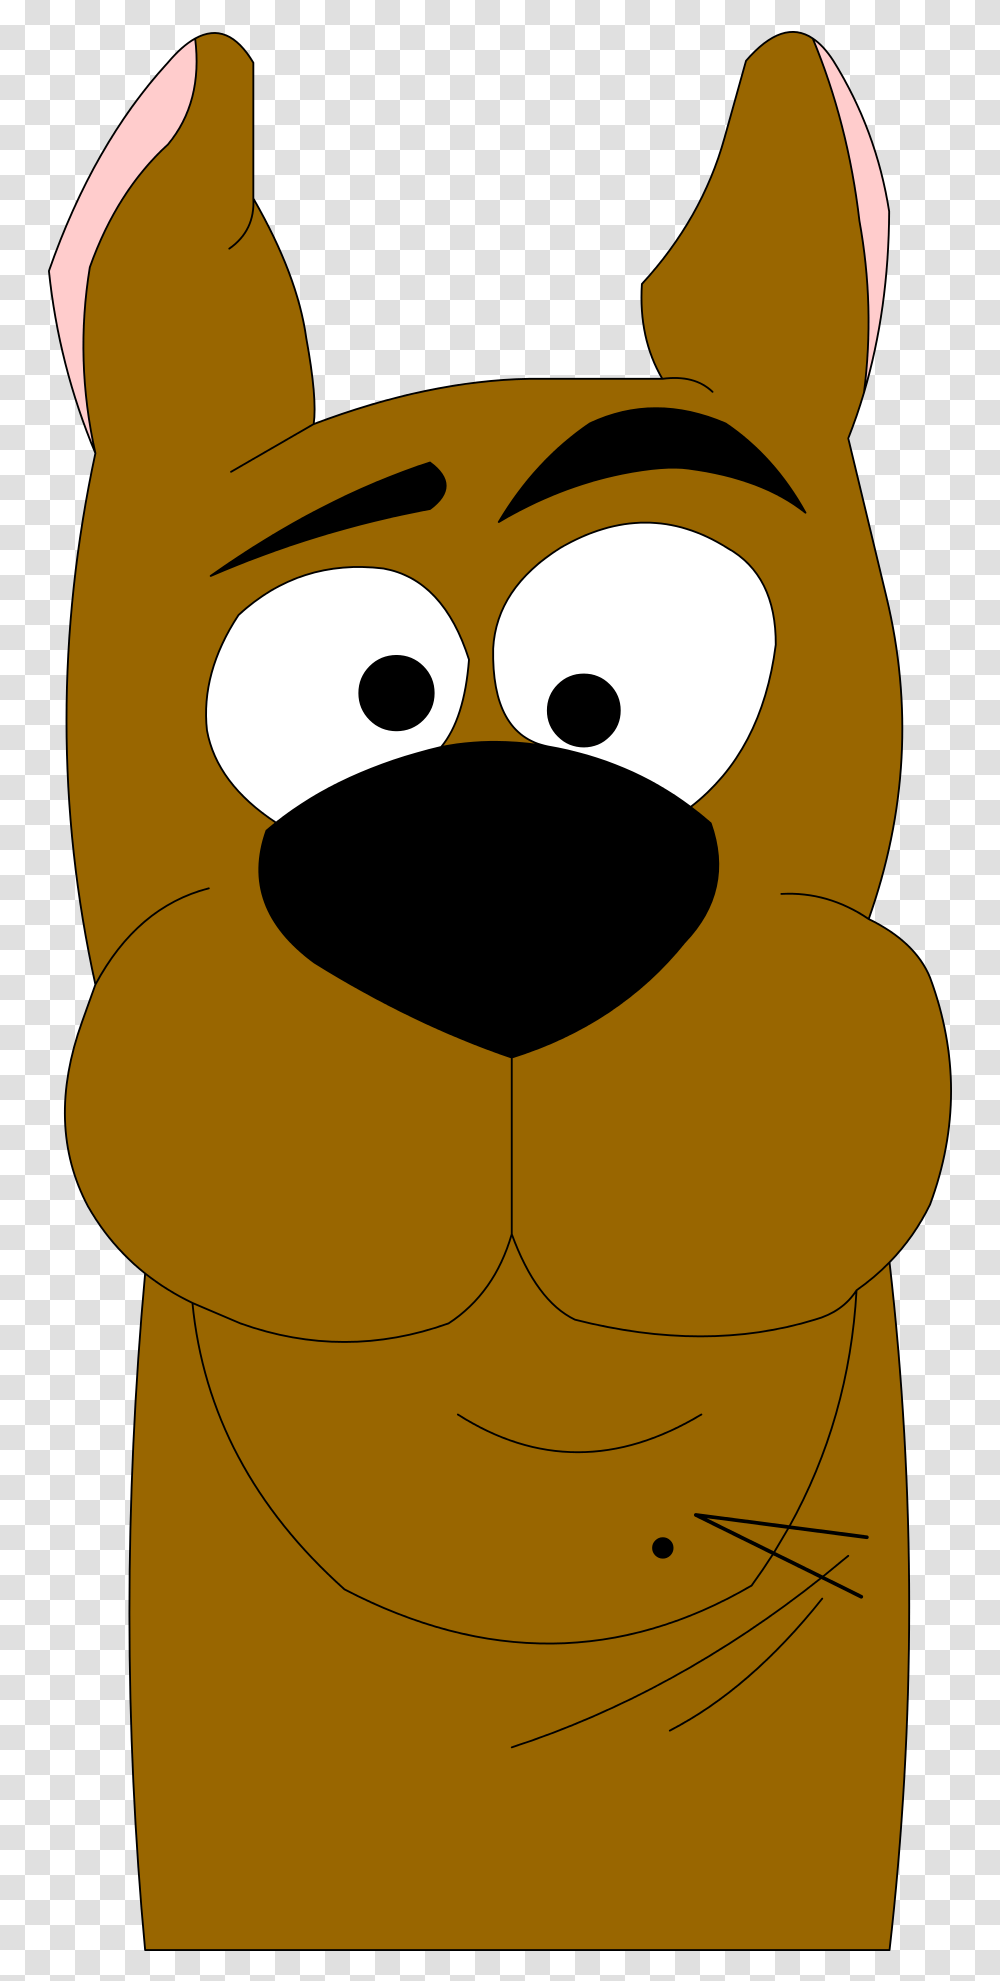 Scooby Doo Dog Image Scooby Doo Background, Face, Penguin, Bird, Animal Transparent Png